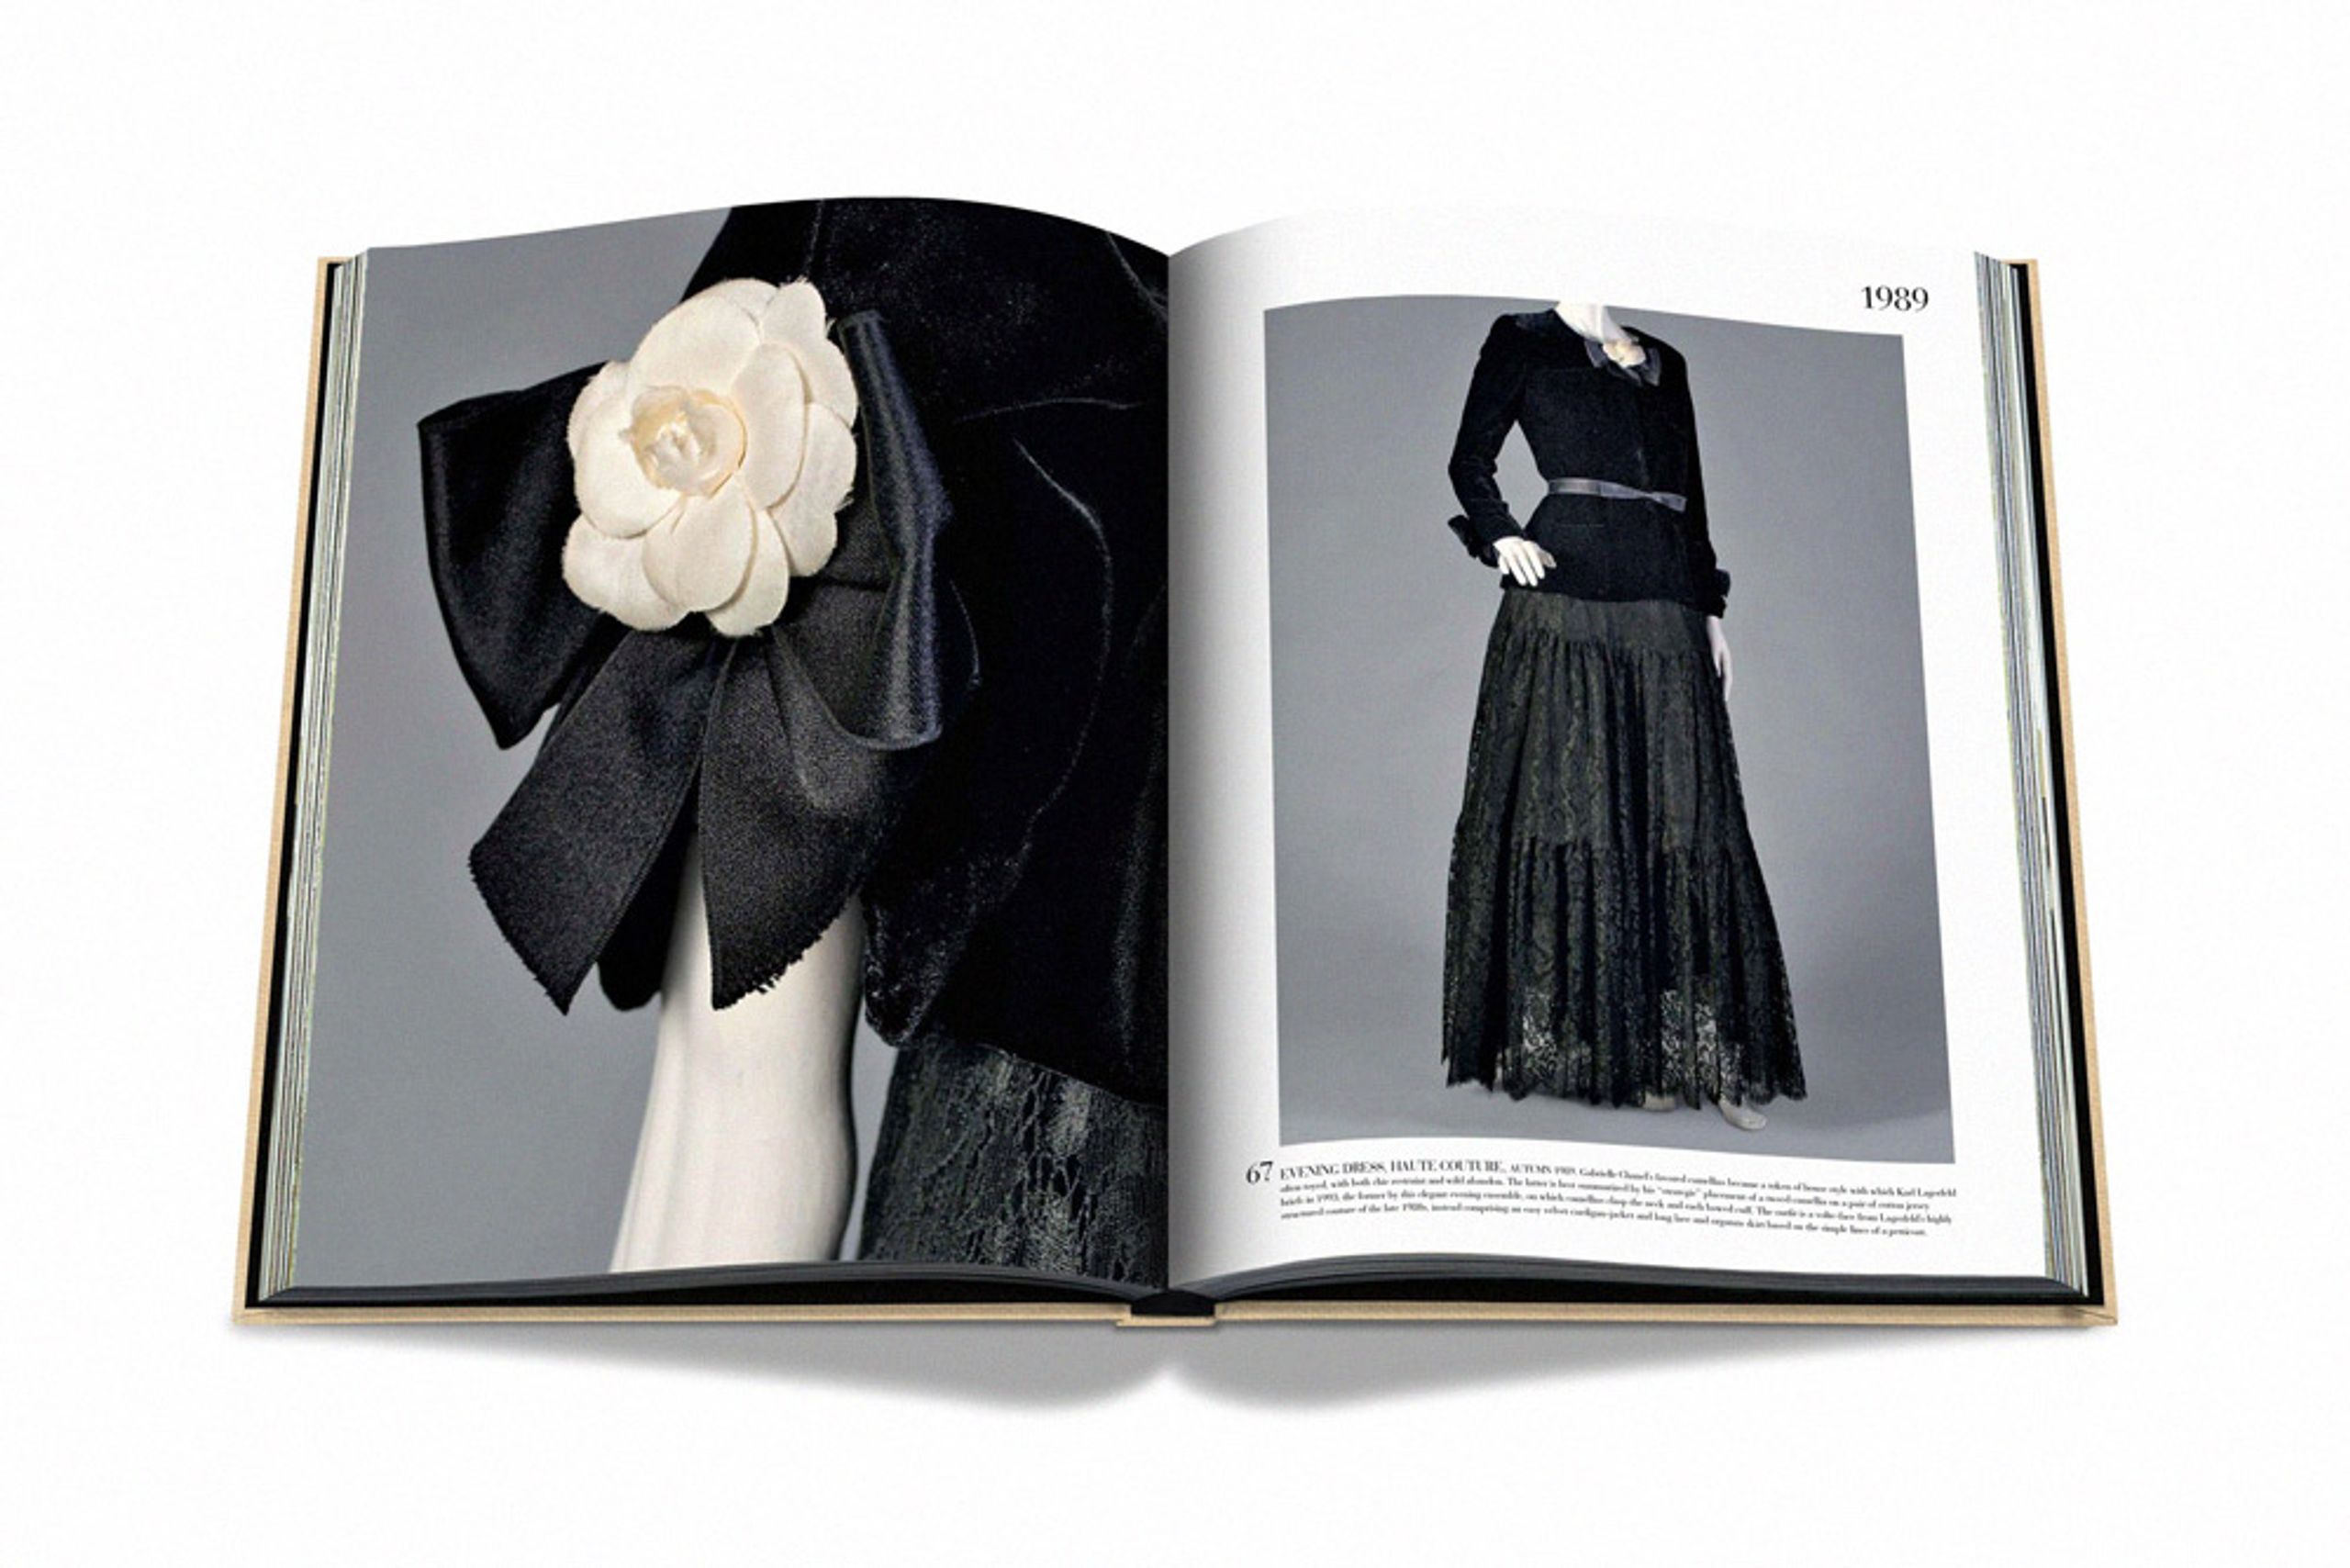 Assouline Chanel: The Impossible Collection Book In Blk